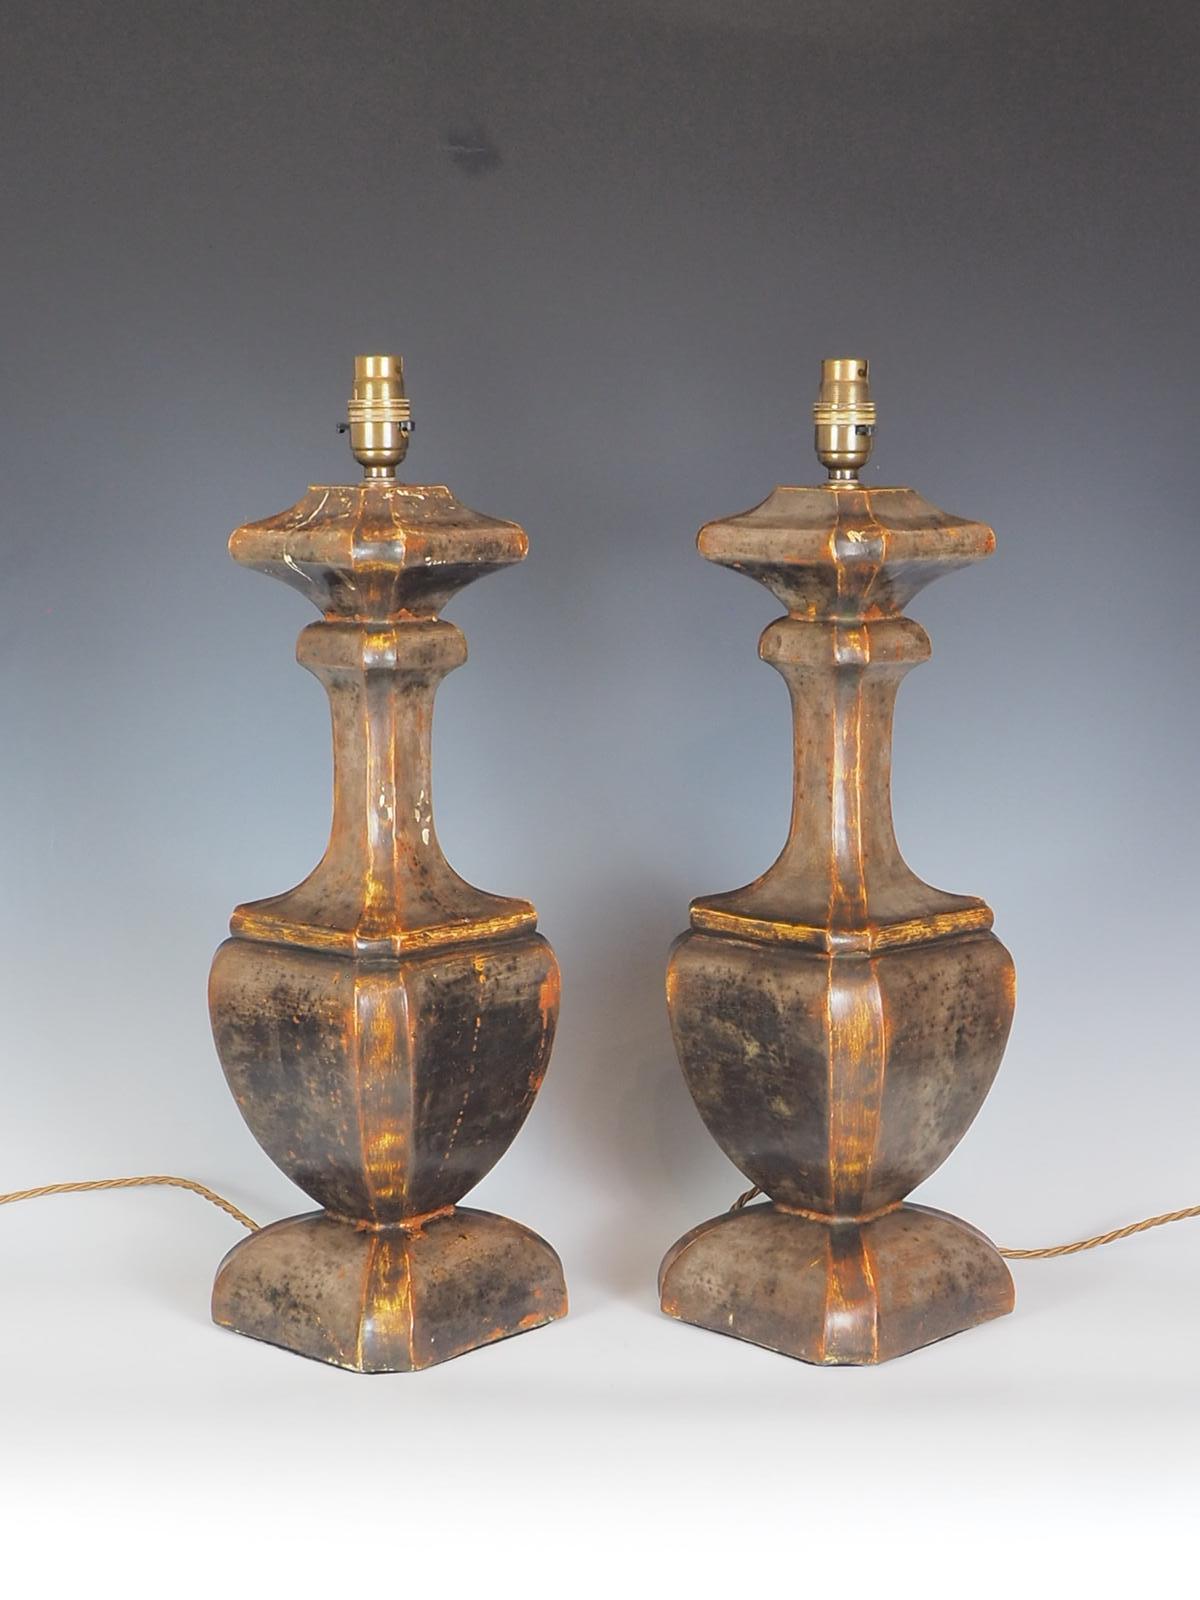 Pair of Antique Italian Polychrome Table Lamps exudes elegance with their exquisite urn shape and captivating painted gesso on wood design, which gives them a unique and beautiful patina. The lamps showcase a stunning patina that adds a touch of